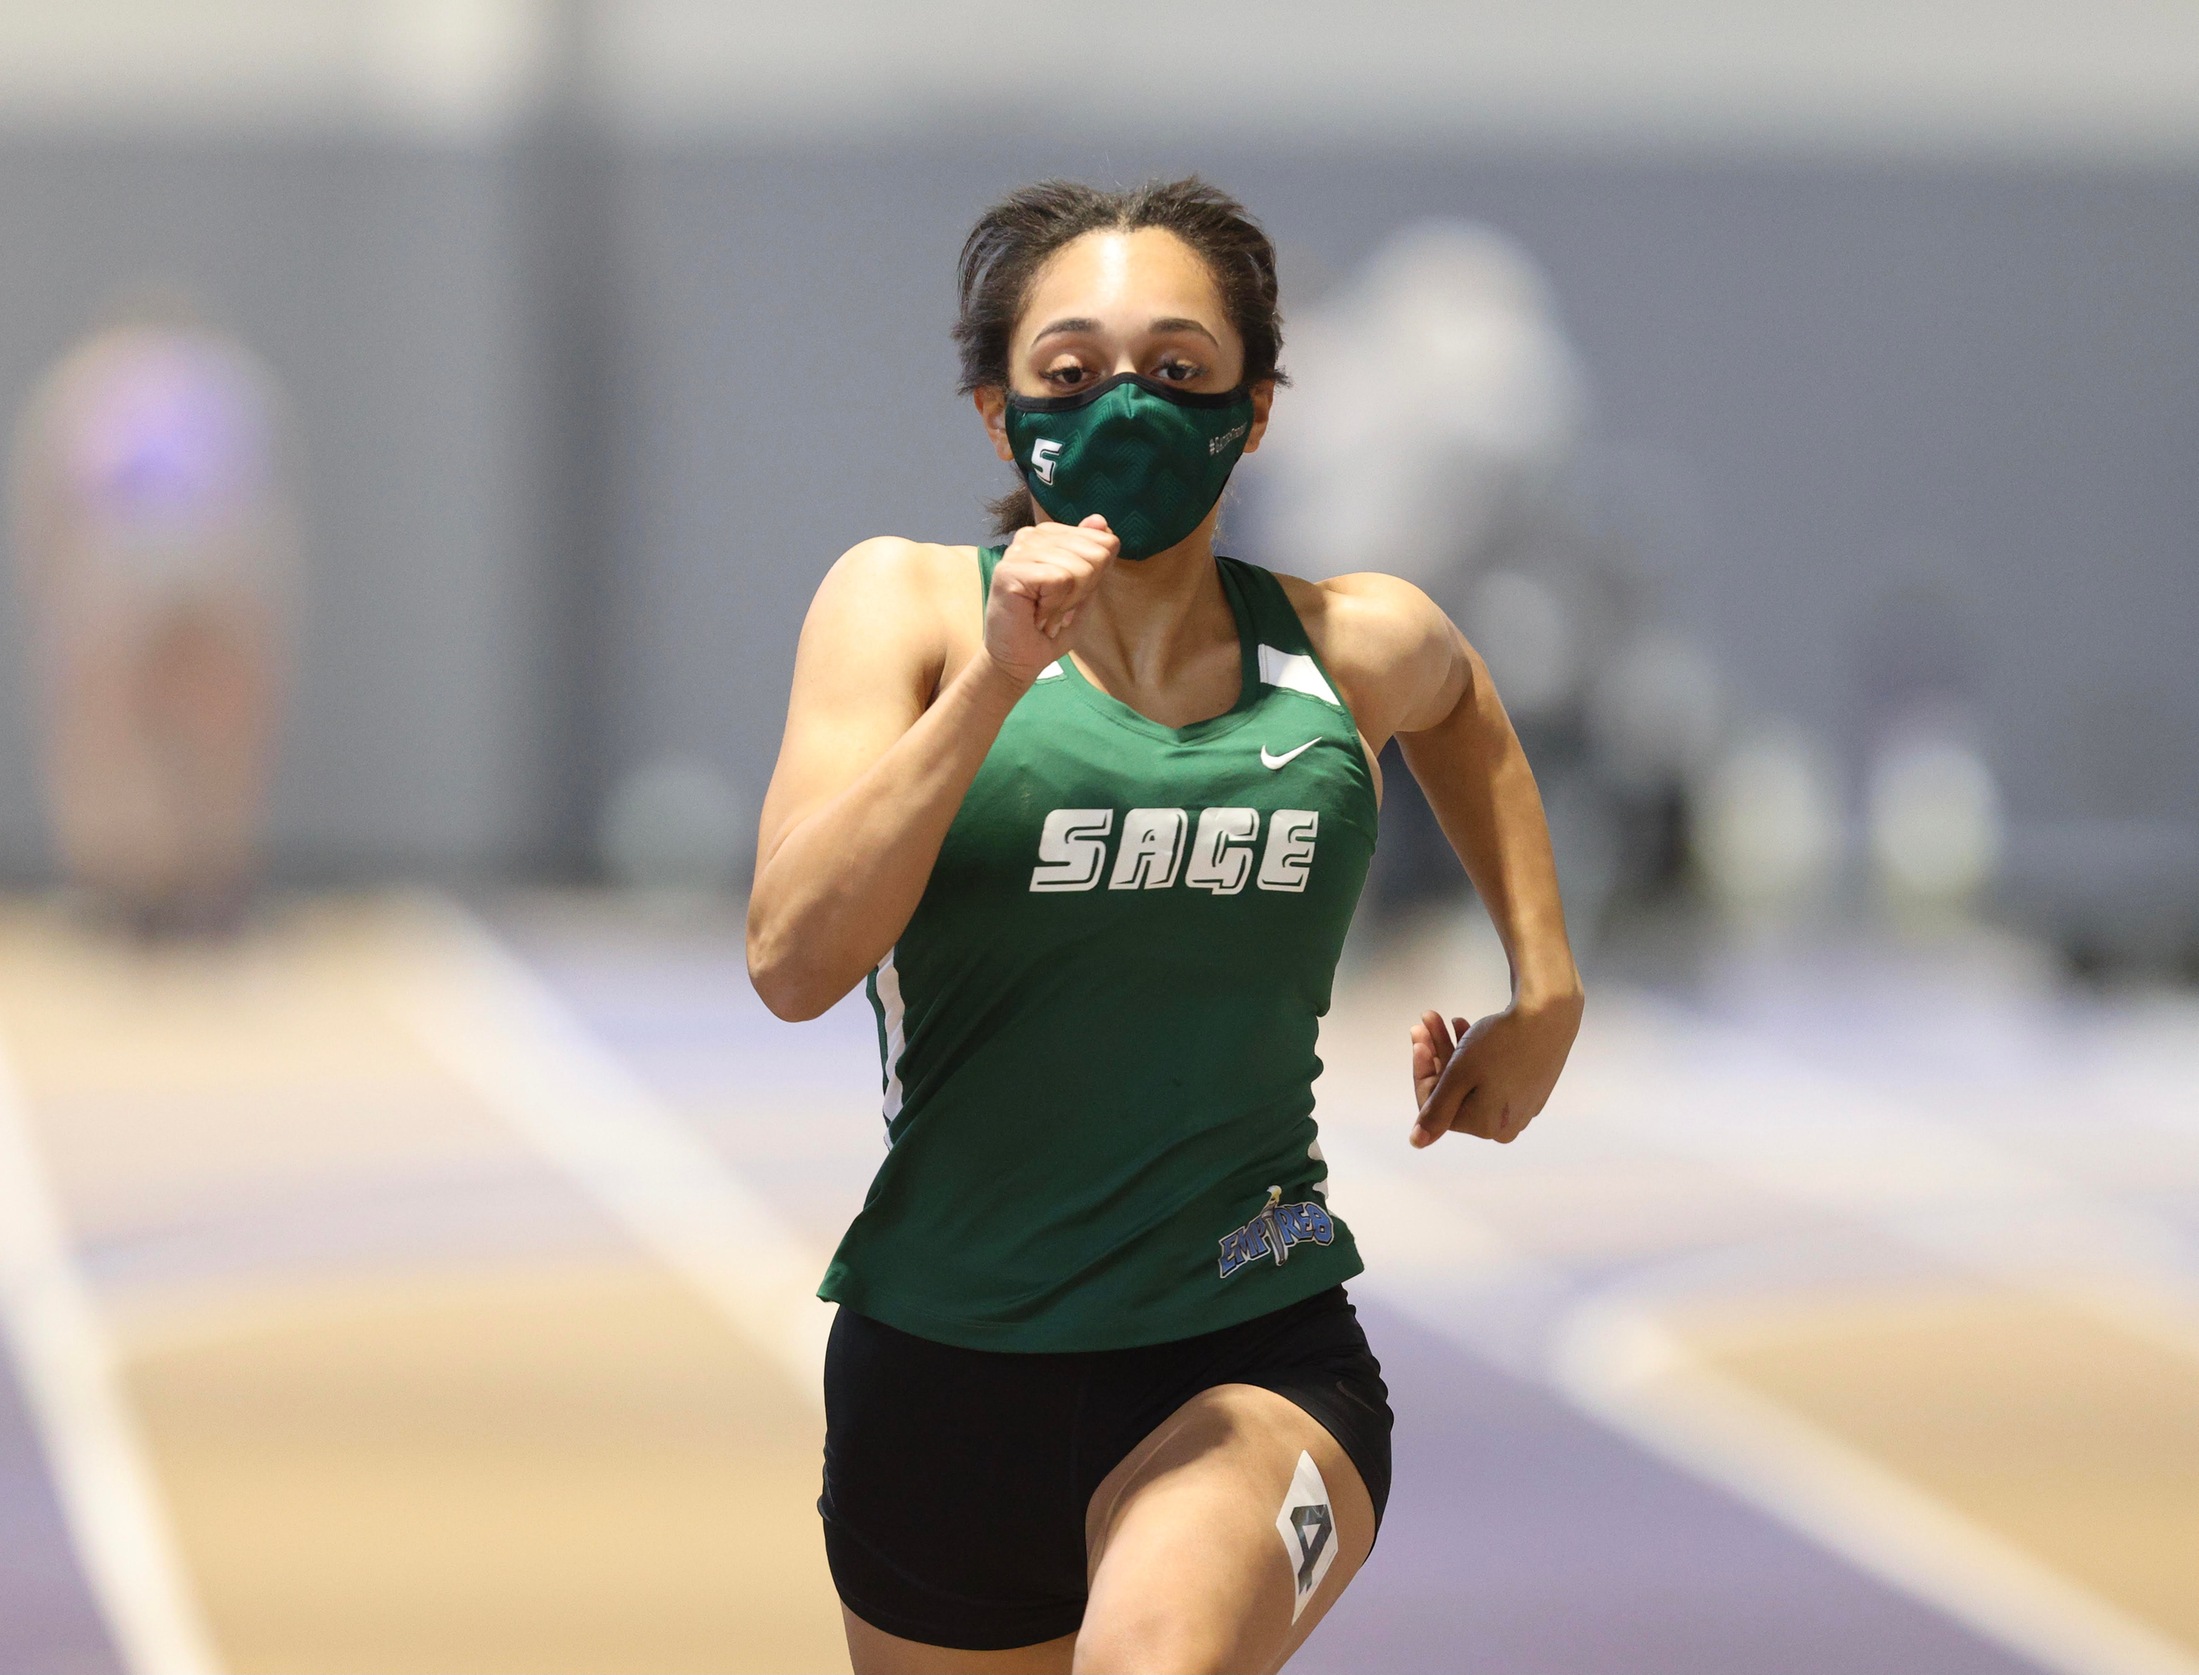 Sage Women's Indoor Track Program Makes Strong Showing at First Meet; Gators take 4th at Nazareth Mini Invite